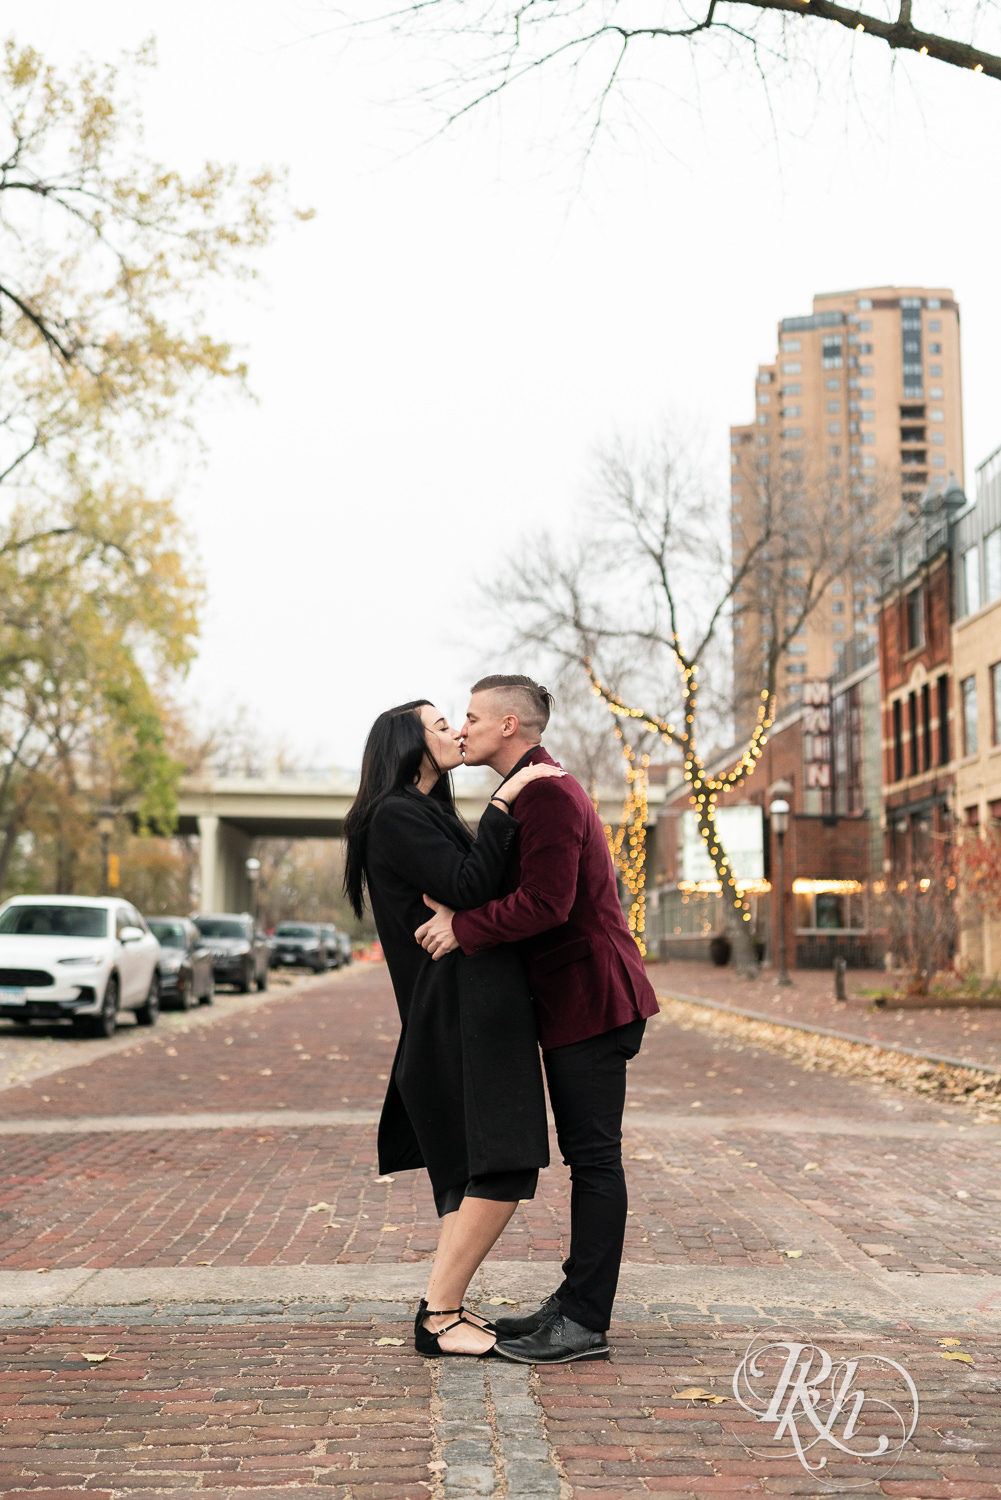 Man in black clothes and burgundy jacket and woman in black dress kiss in the street in Minneapolis, Minnesota.